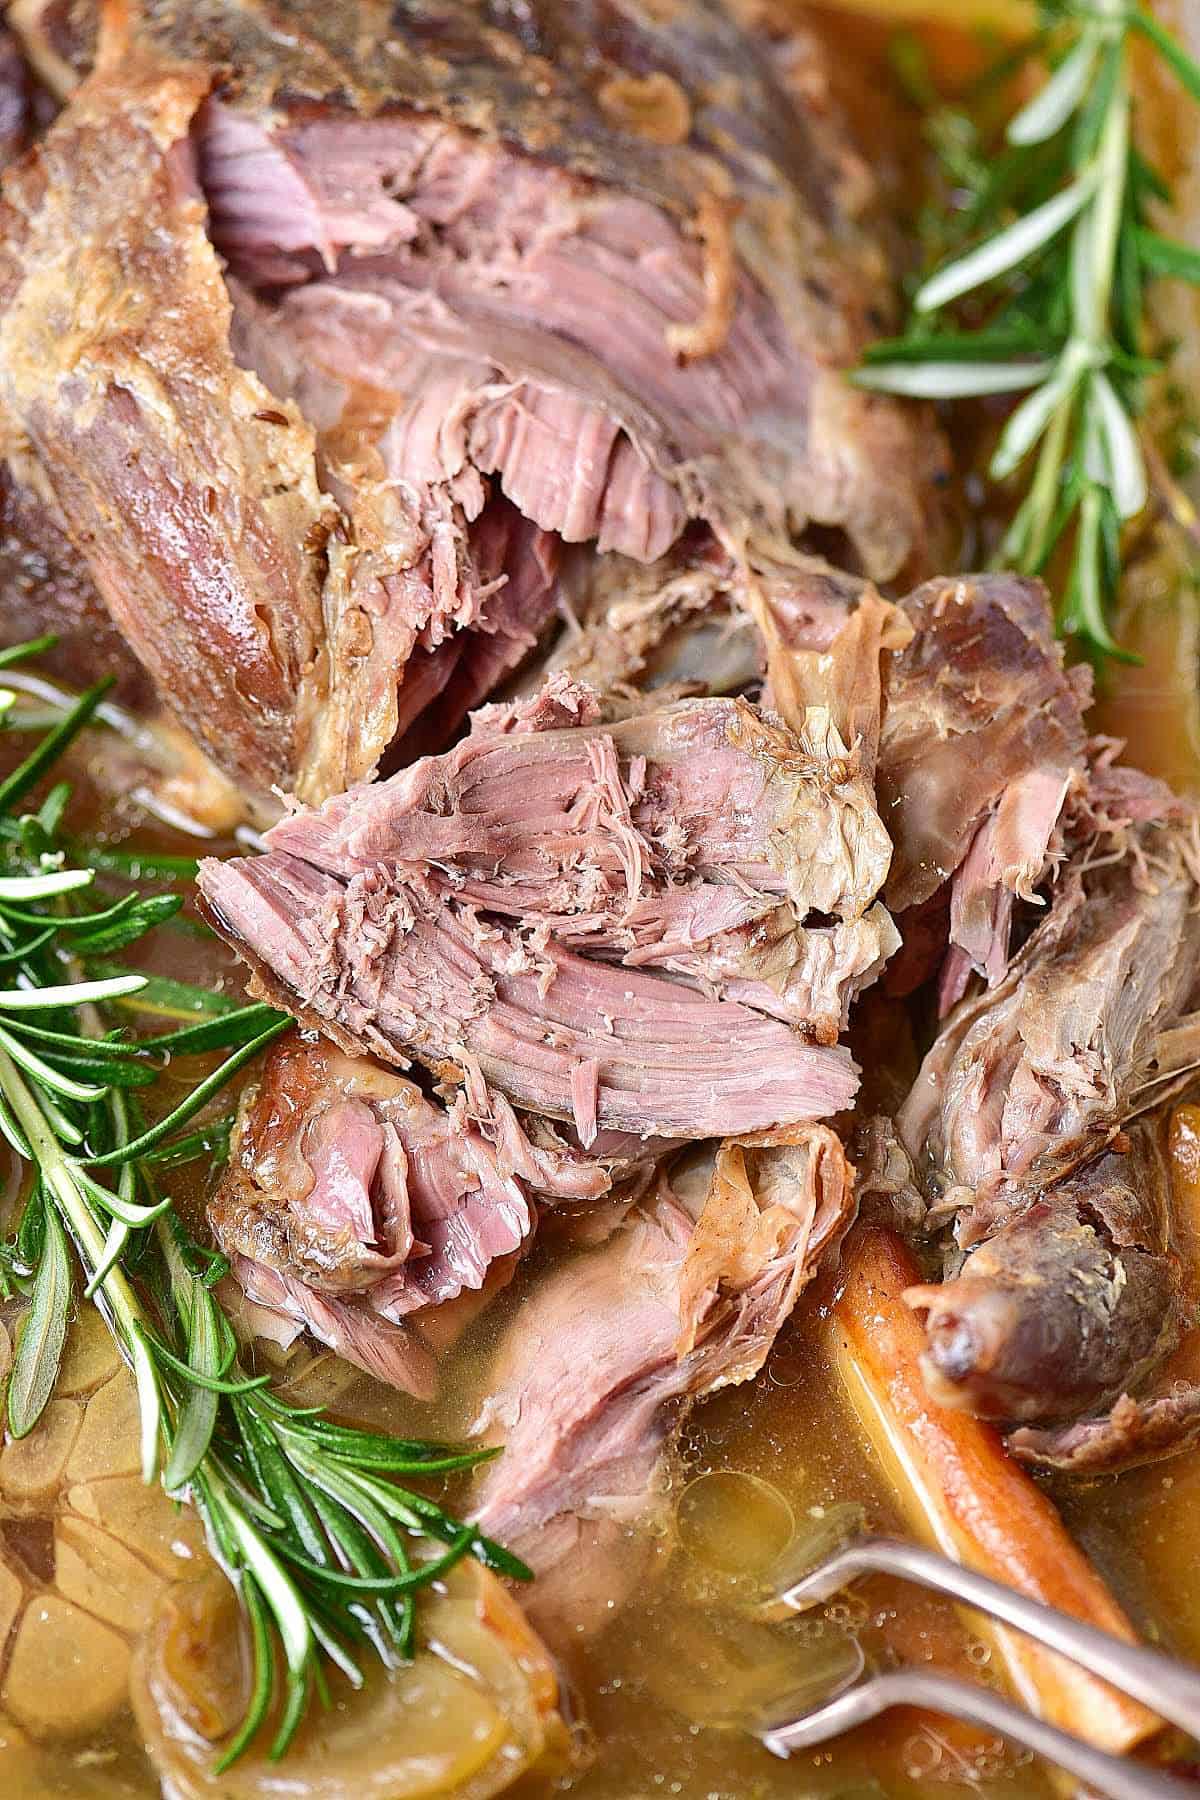 Pulled apart lamb meat with fresh rosemary. Close up image.